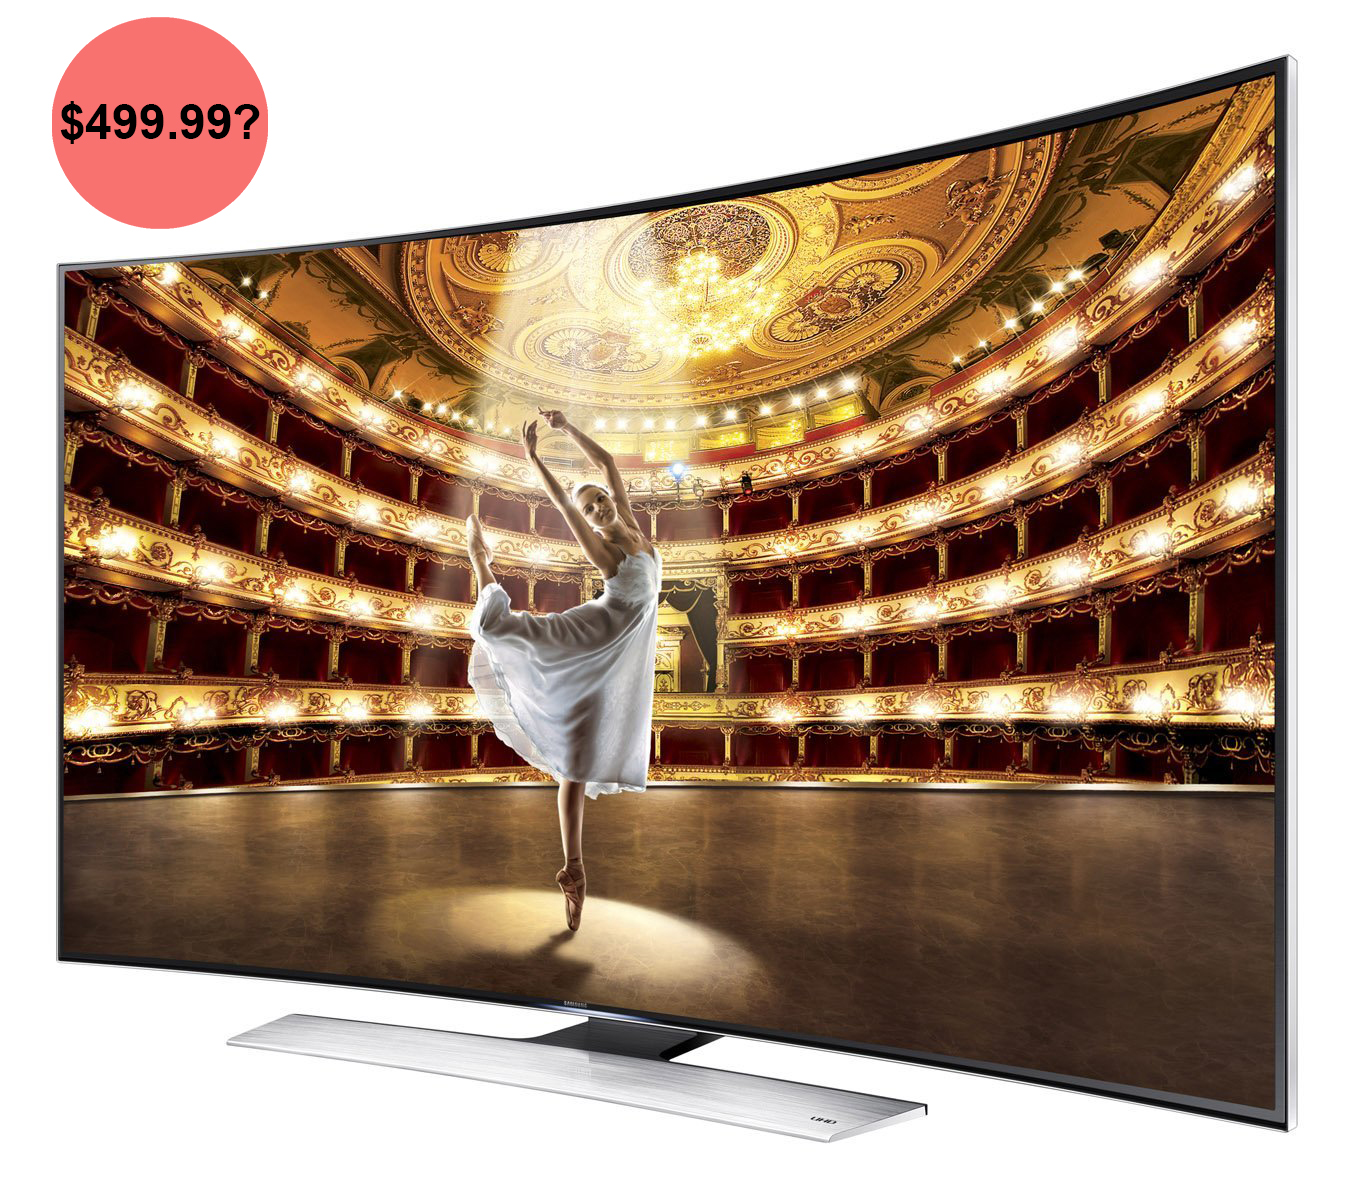 Samsung UHD Curved LED TV Deal Amazon Prime Day